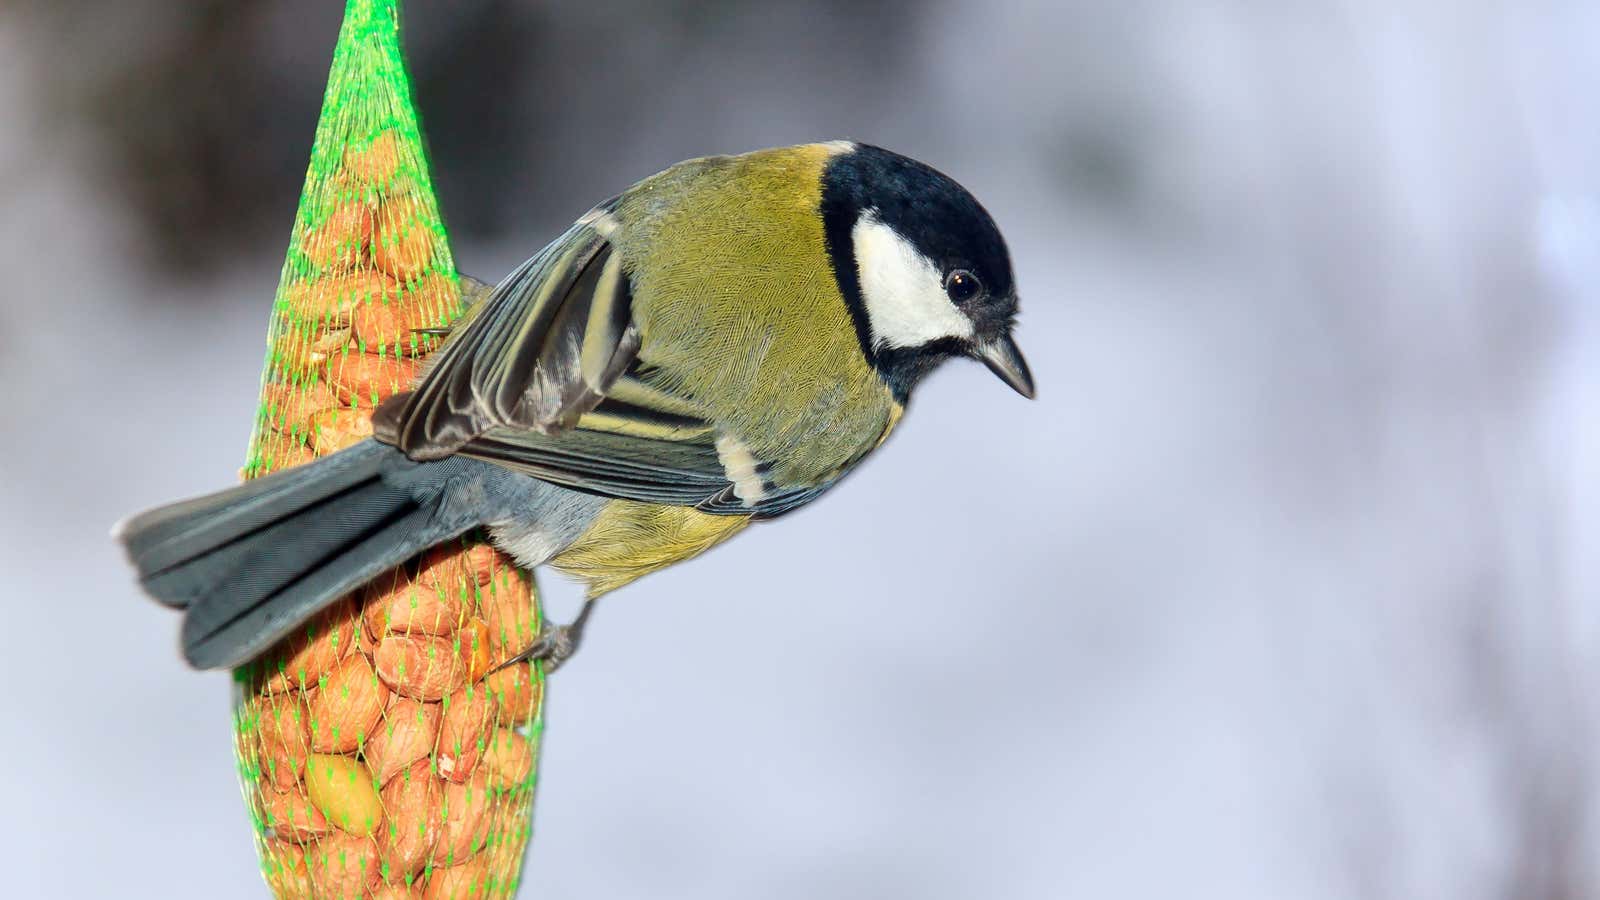 The great tit is one of the most common backyard birds in the UK.